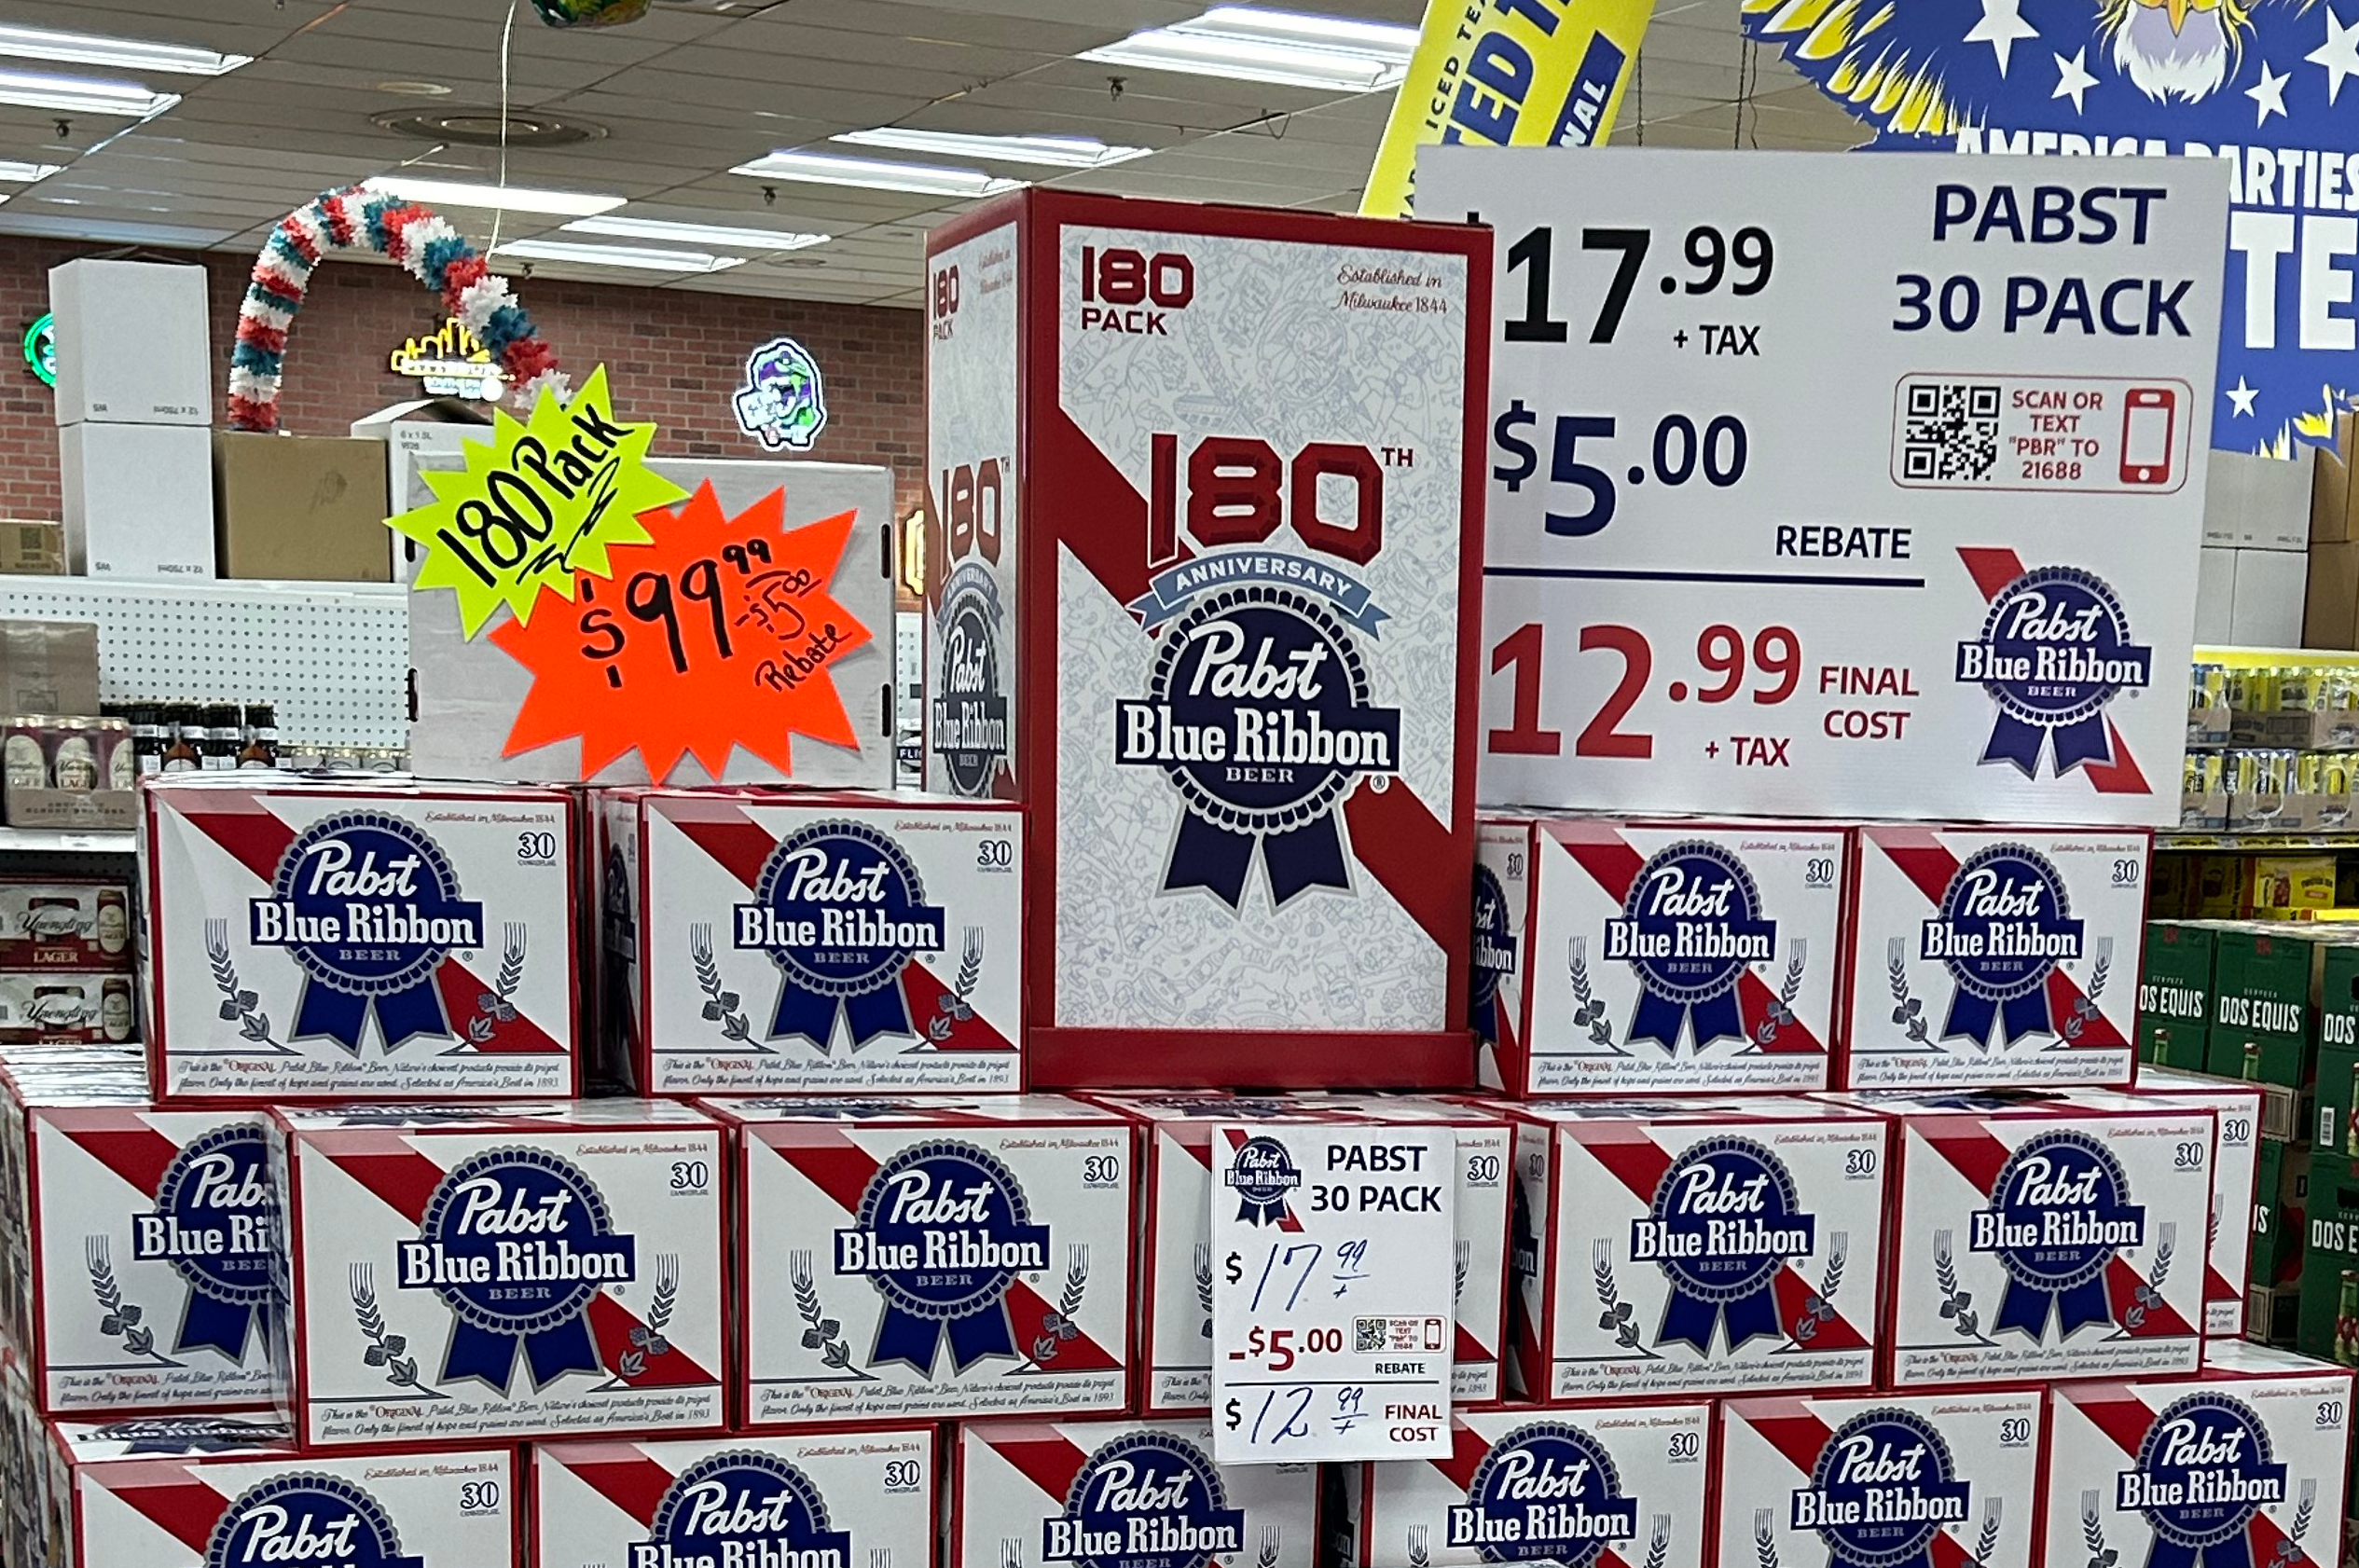 Pabst Blue Ribbon celebrates 180 years with 180-pack of beer